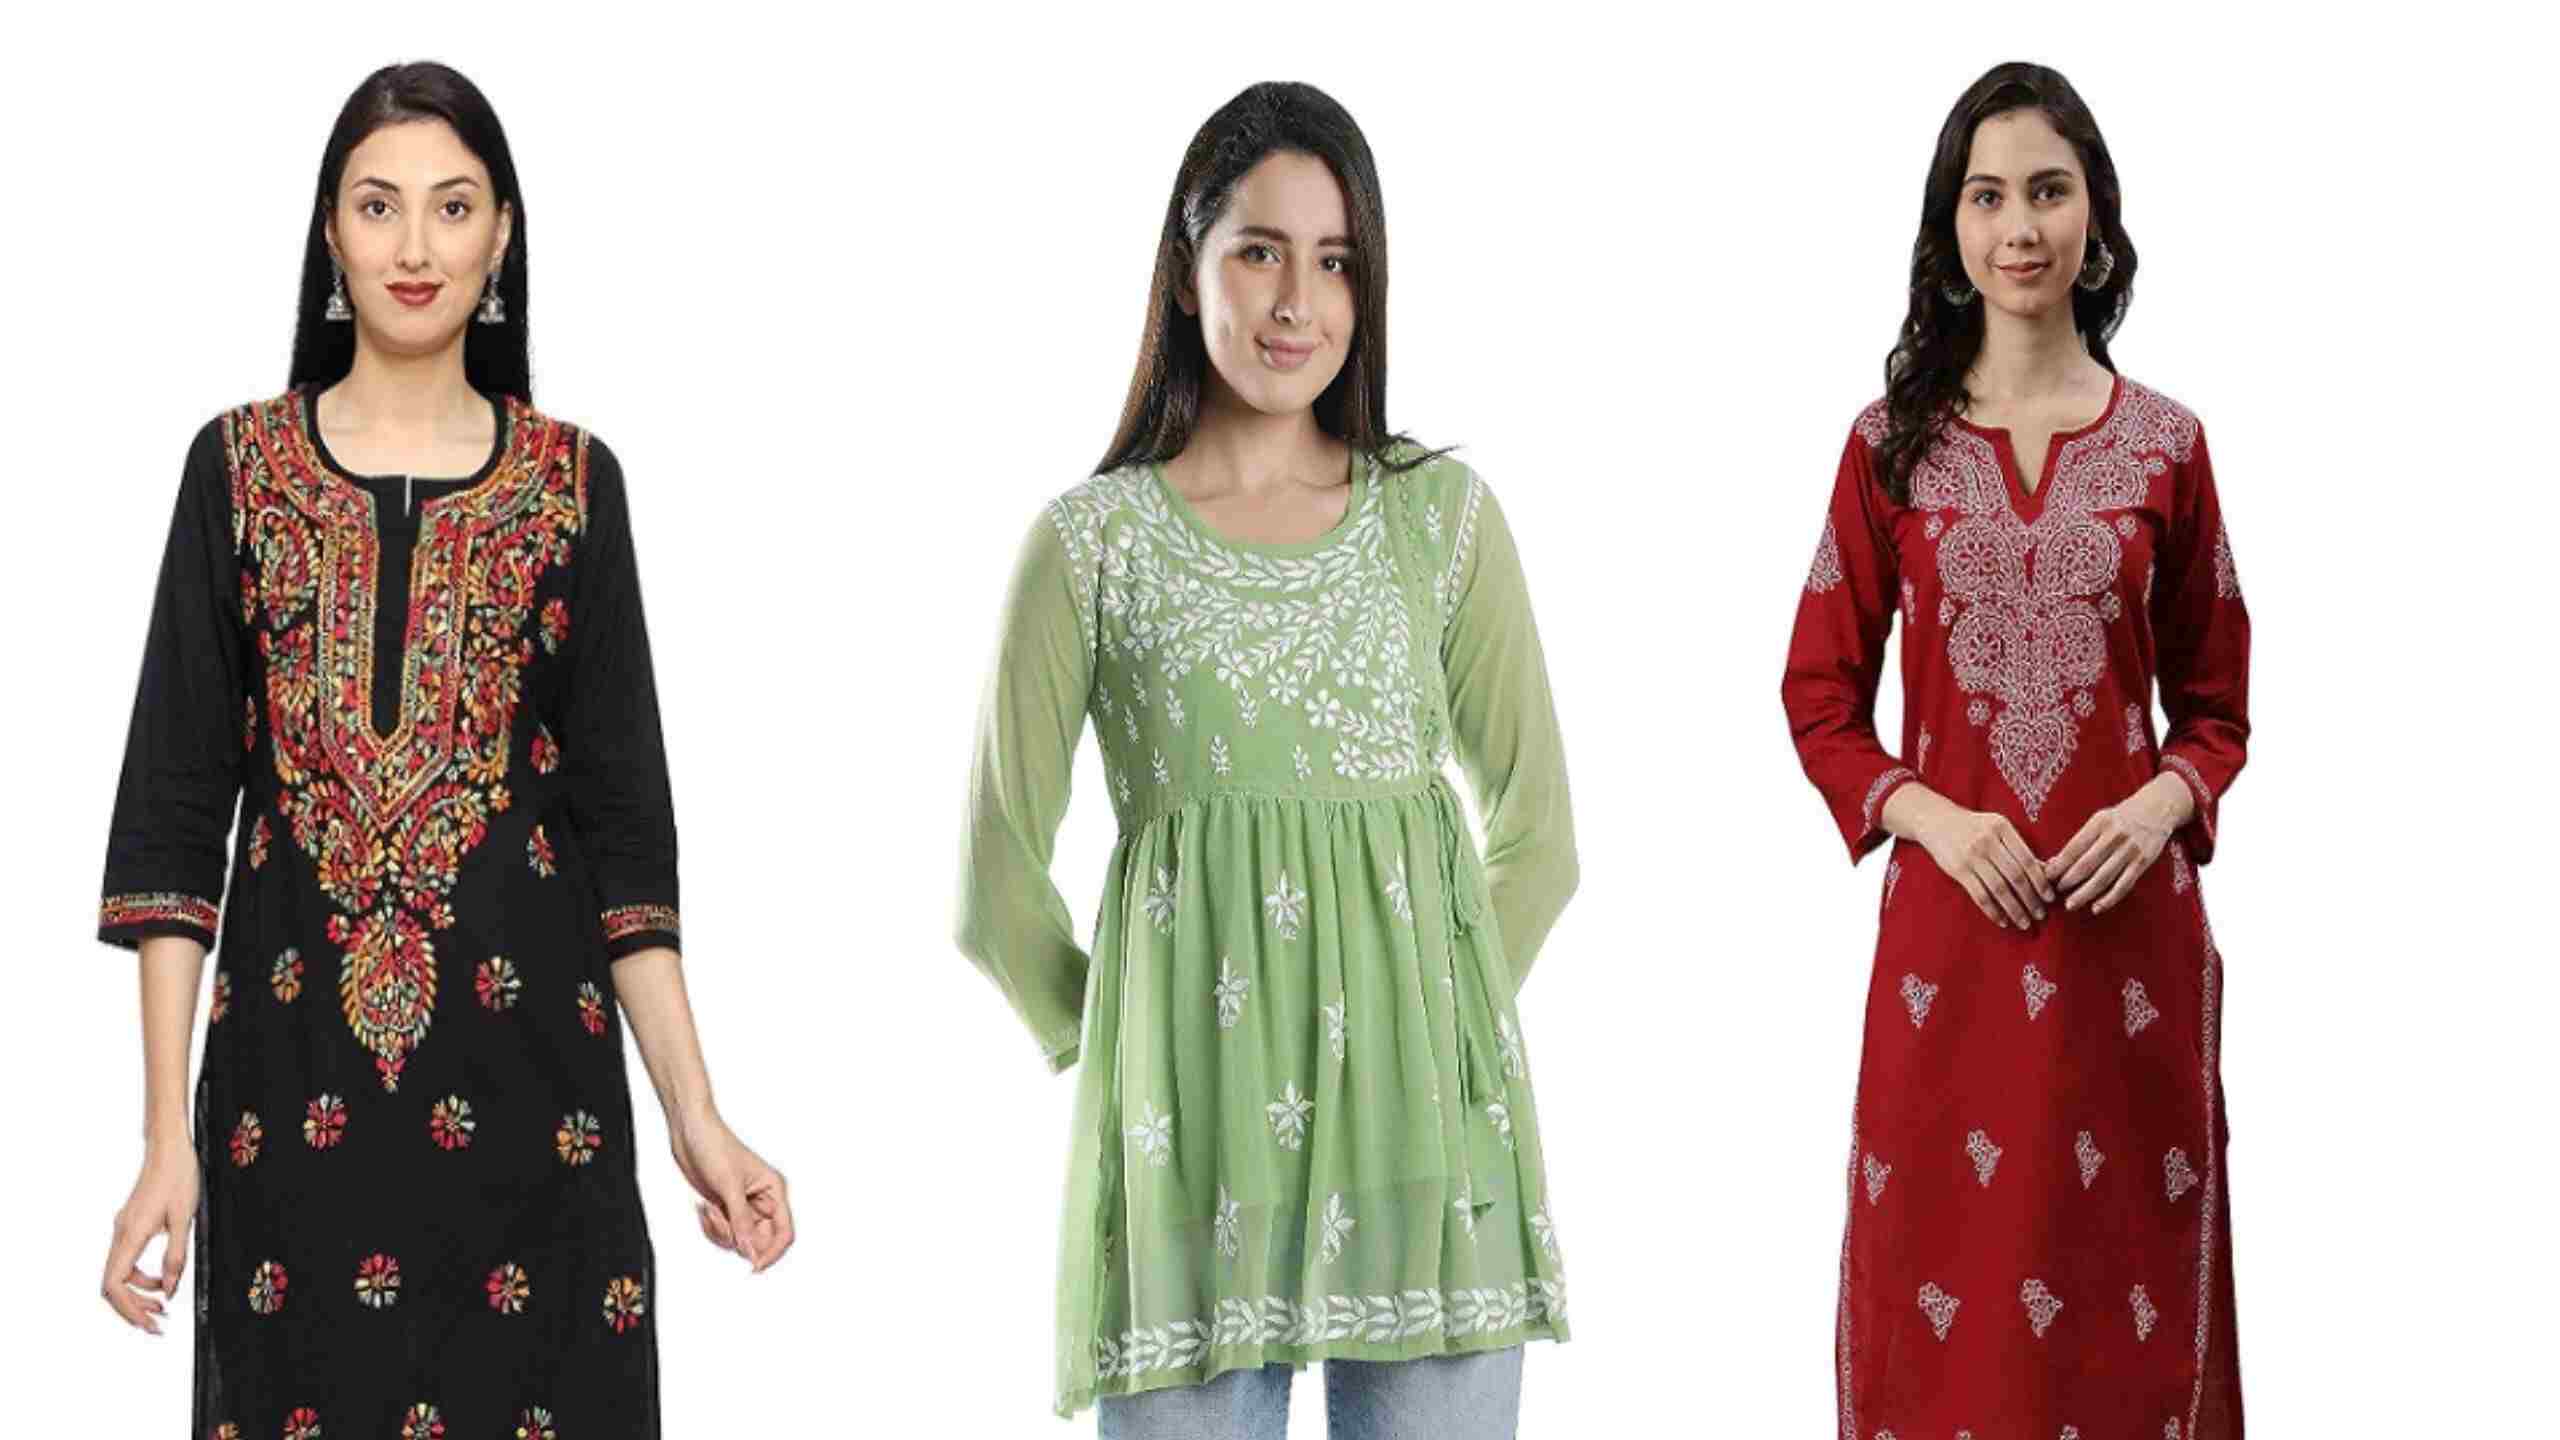 Buy Bella Fab Navratri Special Cotton Short Kurtis for Girls and Women  Multi-Color at Amazon.in